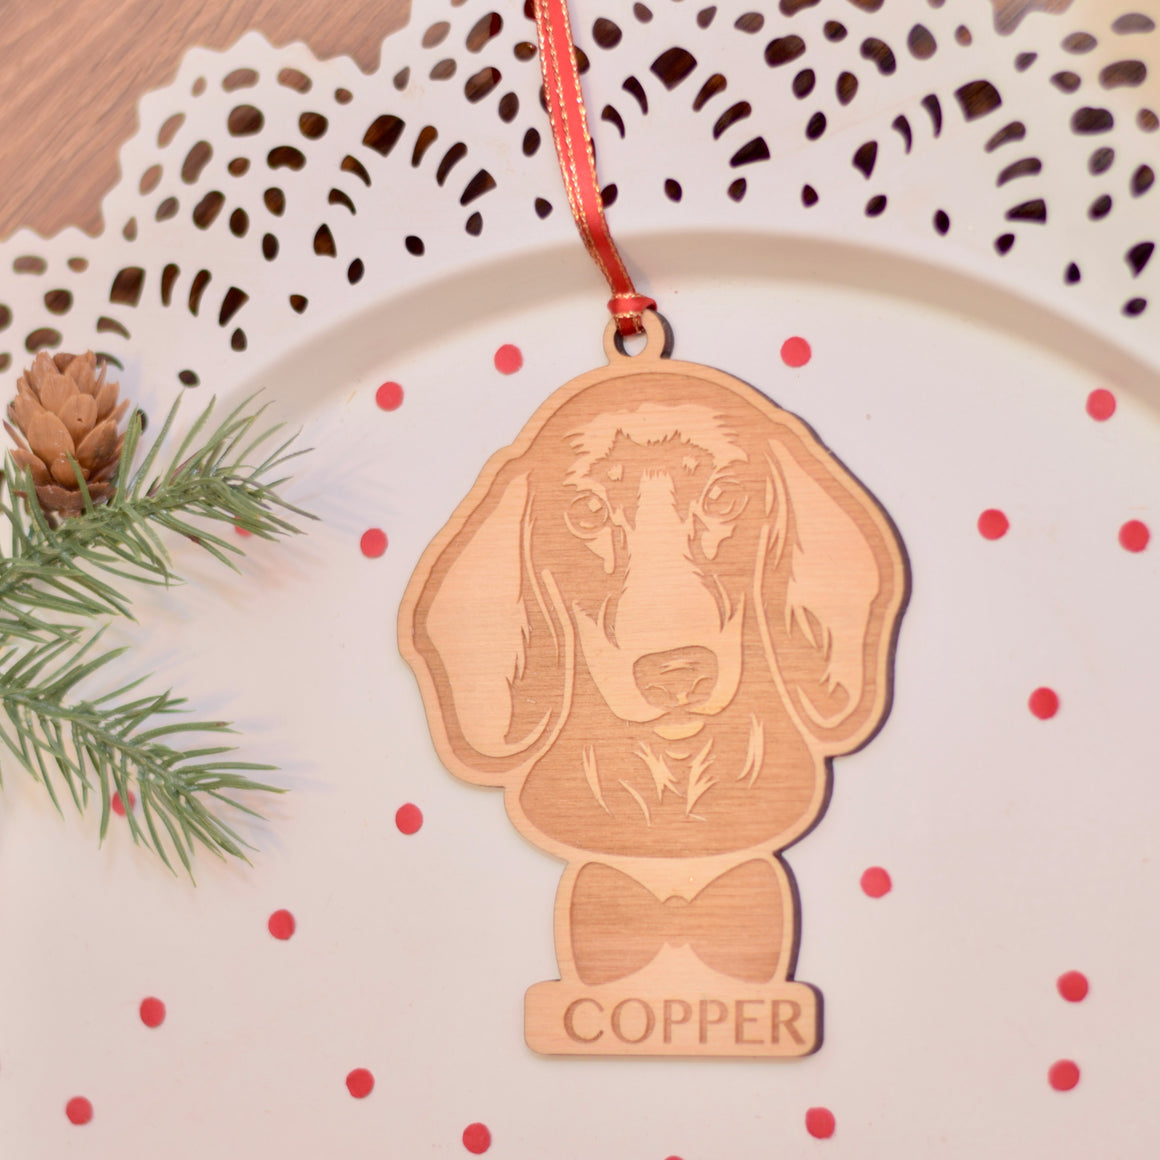 Daschund Ornament for Christmas Tree, Dog Decoration Gift Customized with Name